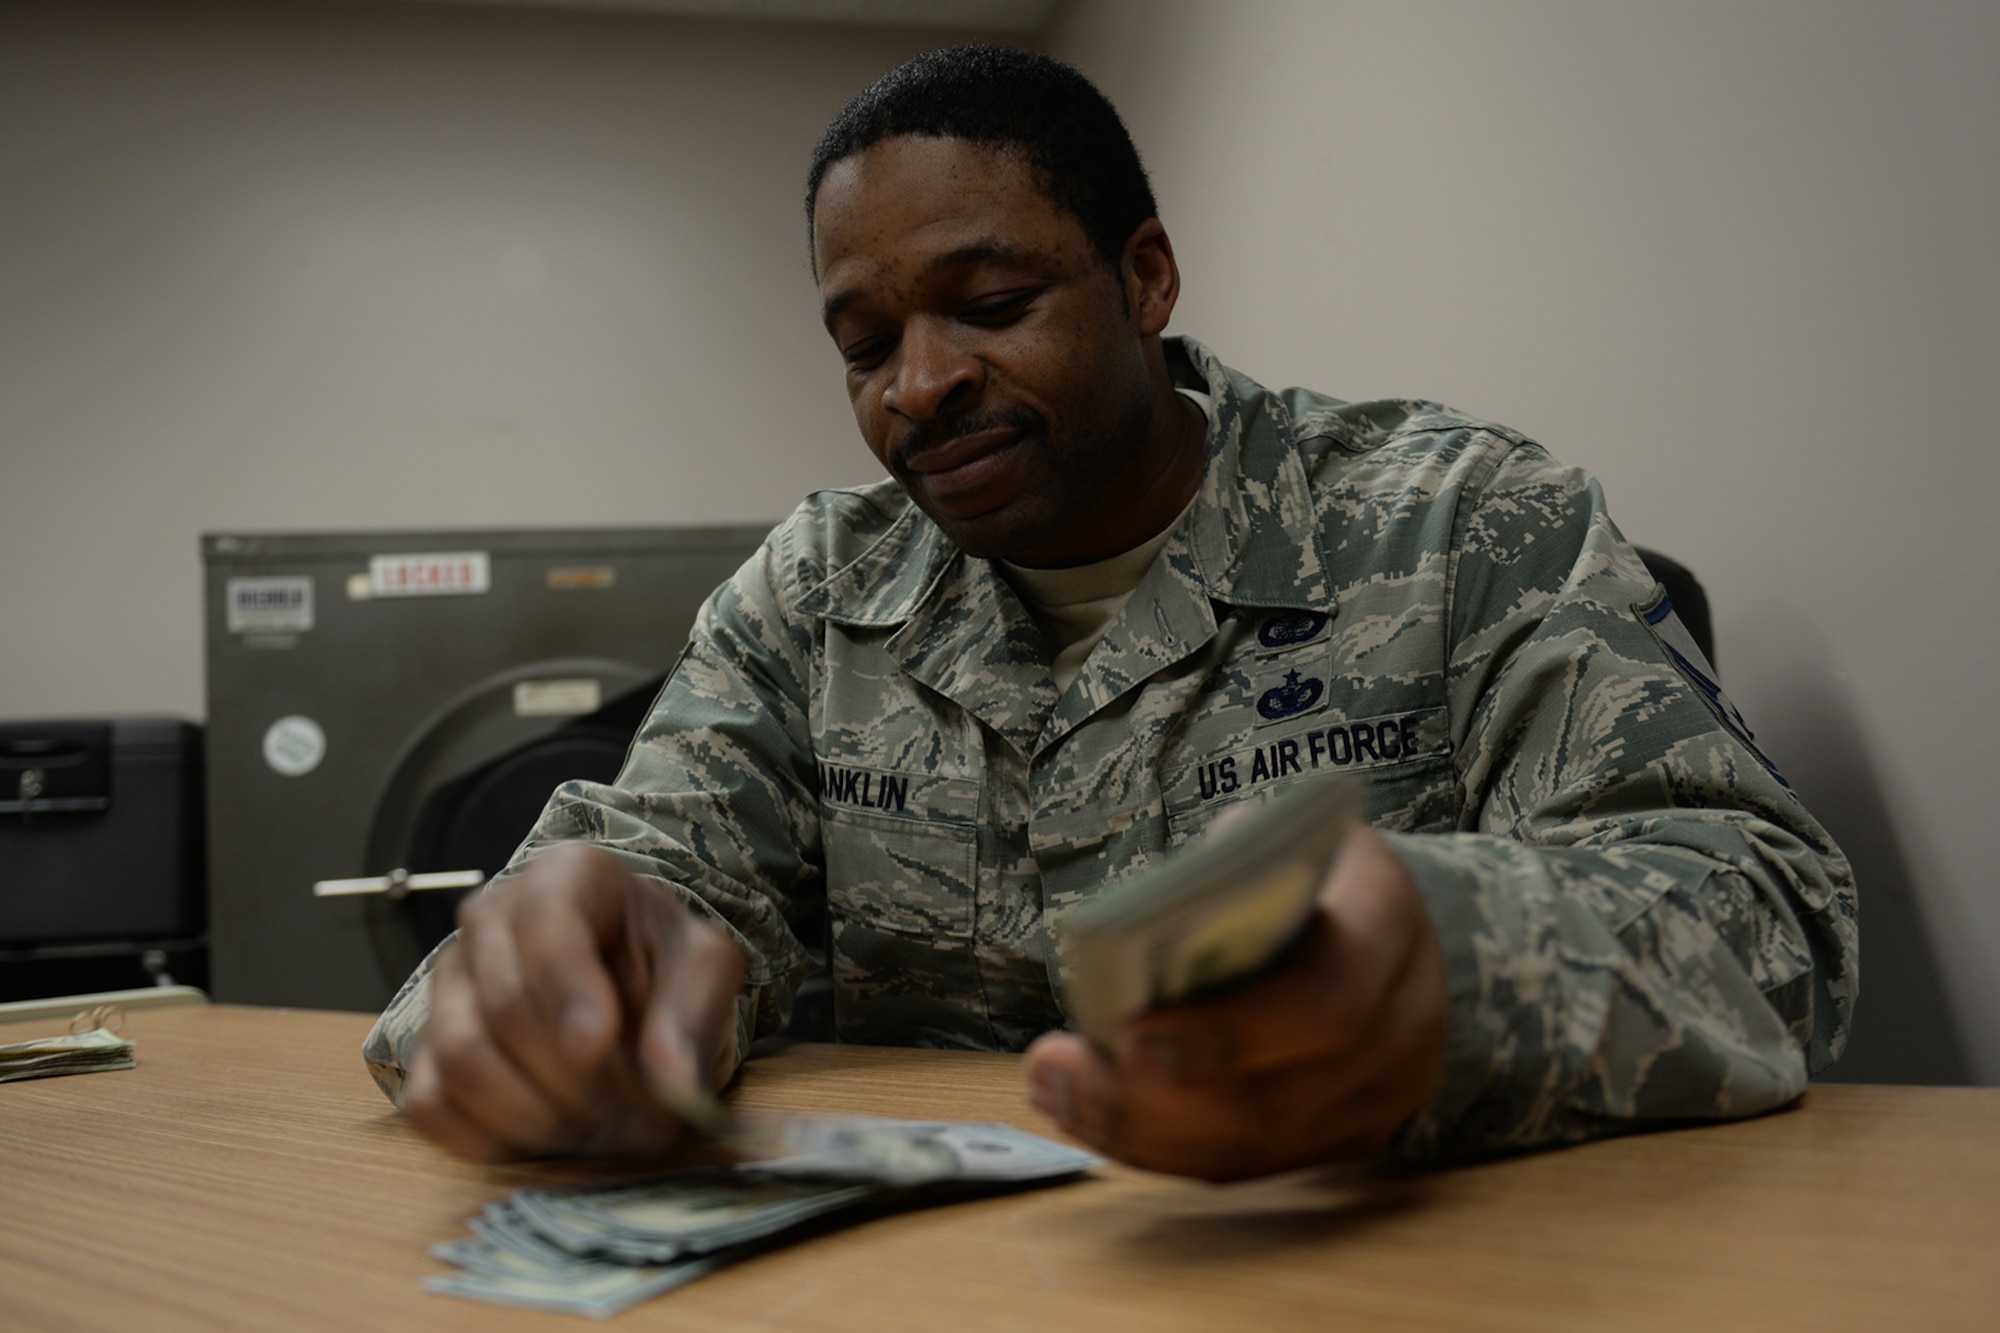 Master Sgt. Brandon Franklin, 55th Comptroller Squadron, counts money March 19, 2019, on Offutt Air Force Base, Neb. Rice was a paying agent during recent flood preparation purchases in the community. (U.S. Air Force photo by Tech. Sgt. Rachelle Blake)